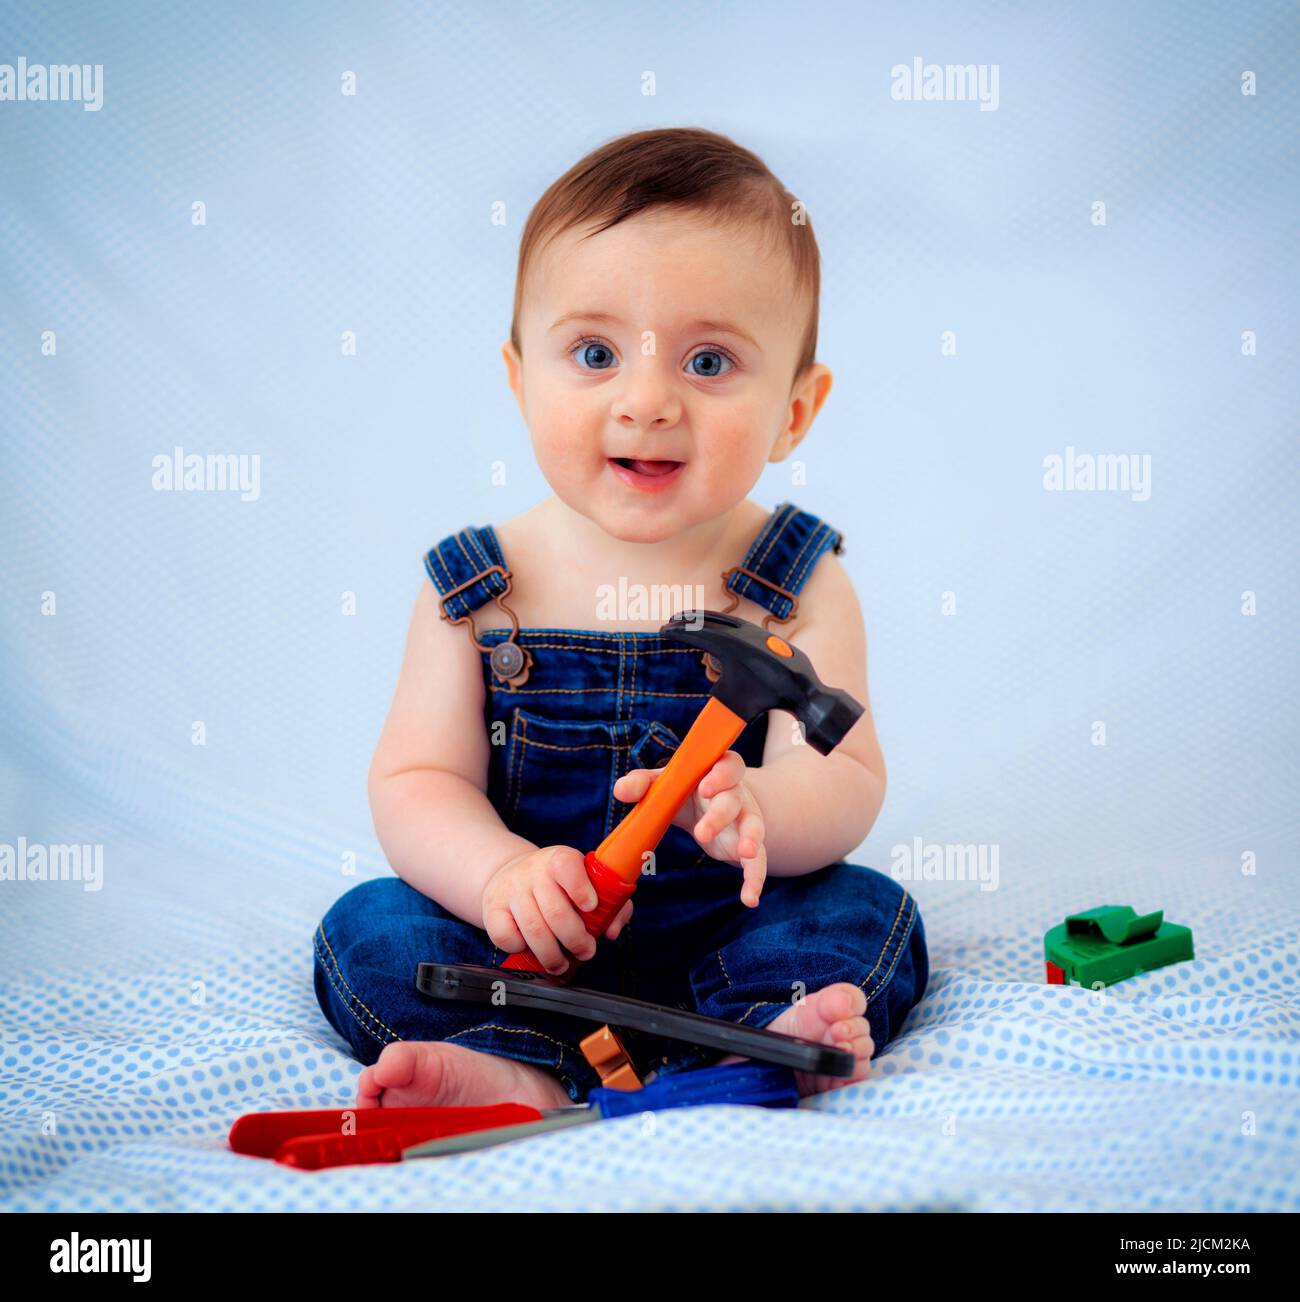 6-month-old baby boy dressed in denim overalls while playing tool worker. He looks like a little carpenter or a little plumber. Stock Photo